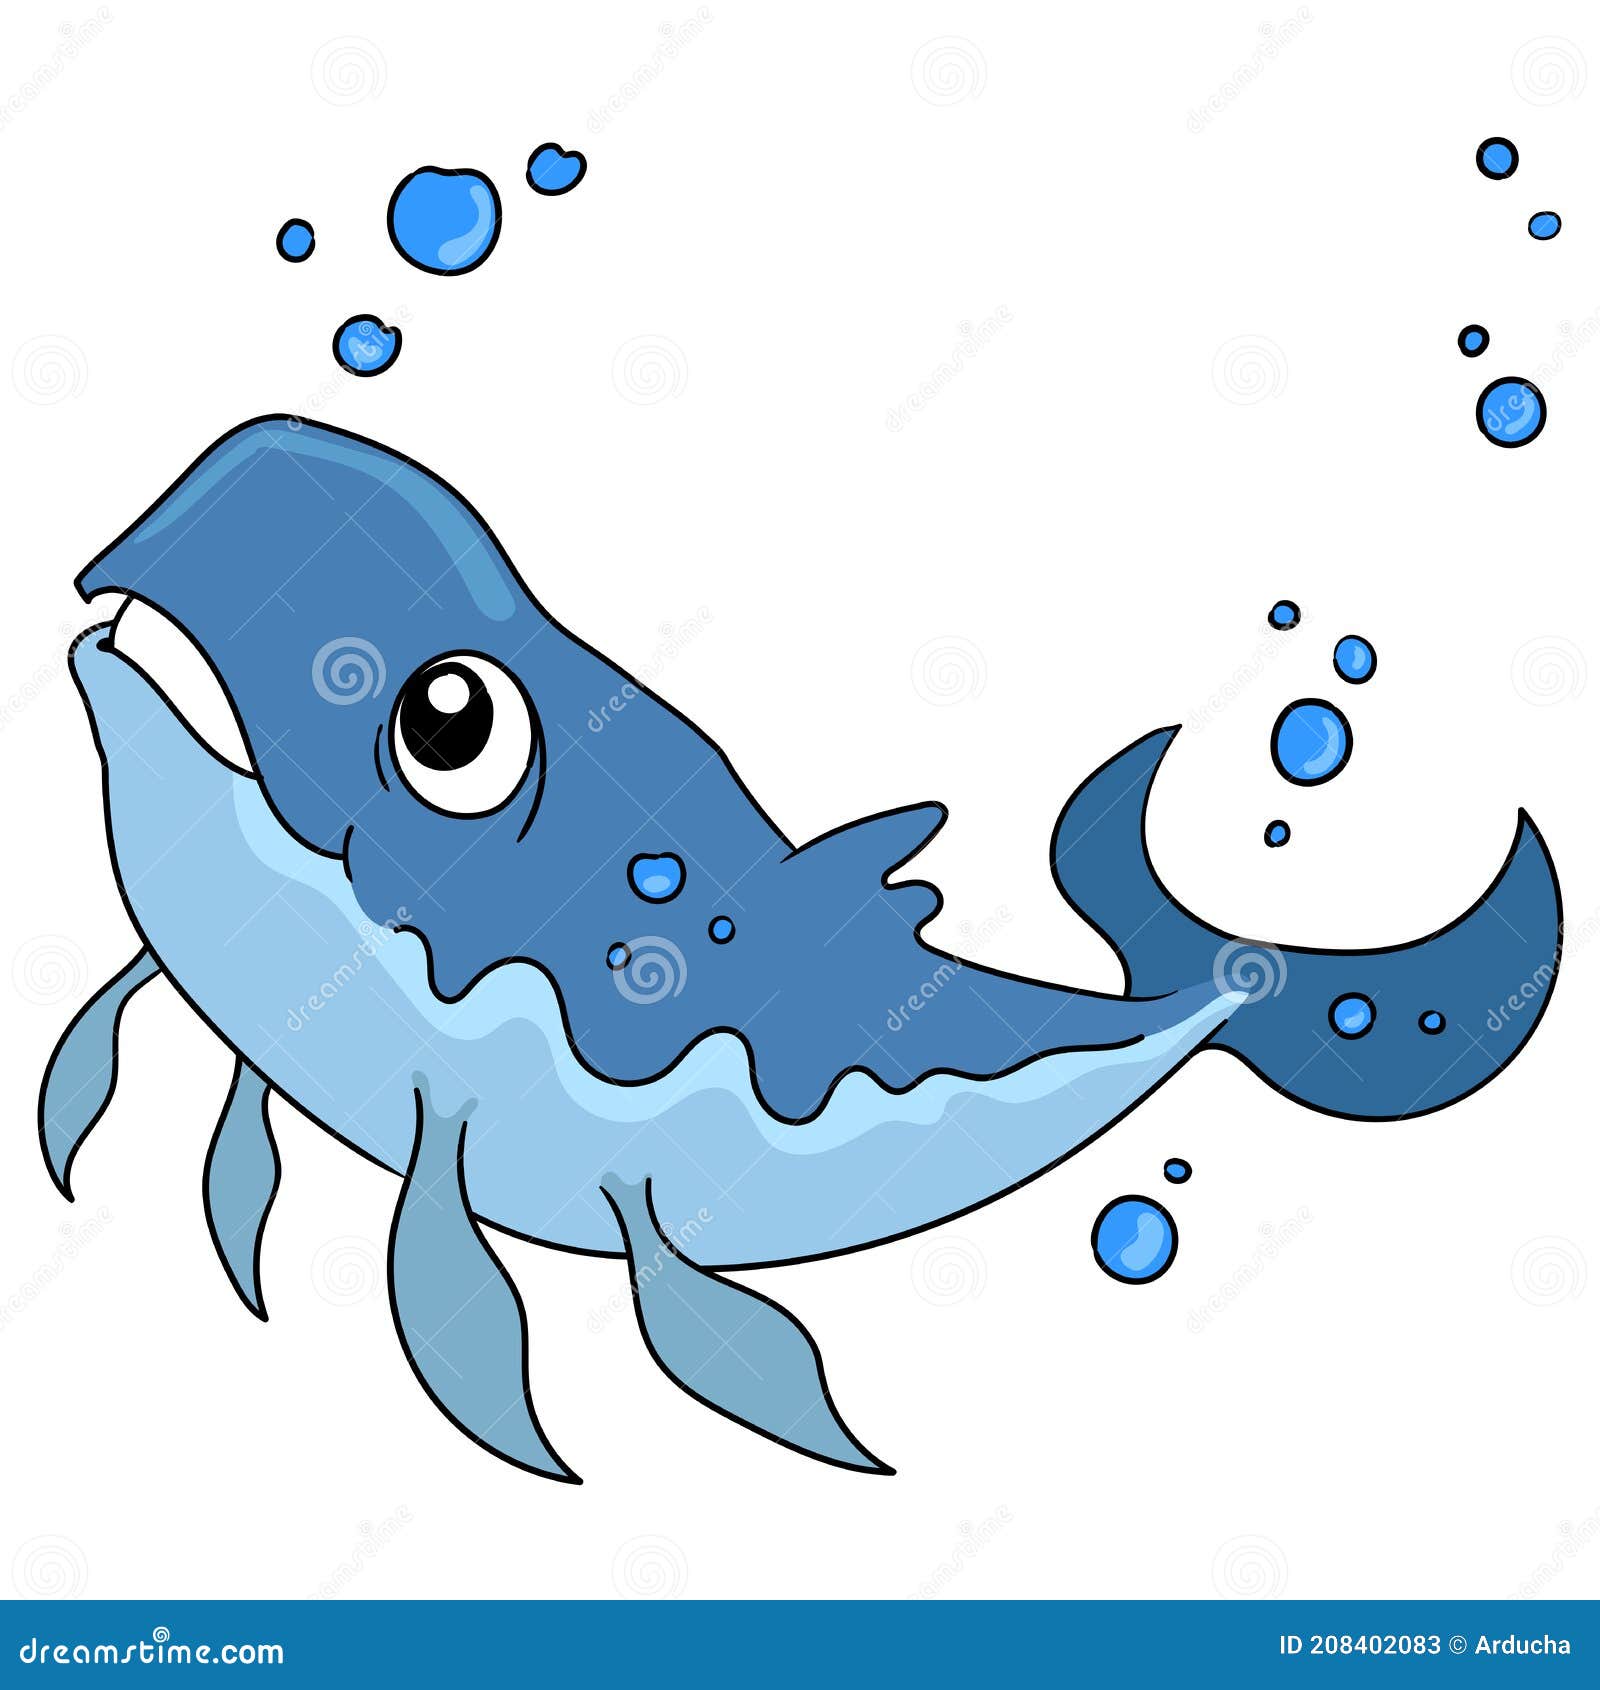 A giant whale swimming stock vector. Illustration of monster - 208402083